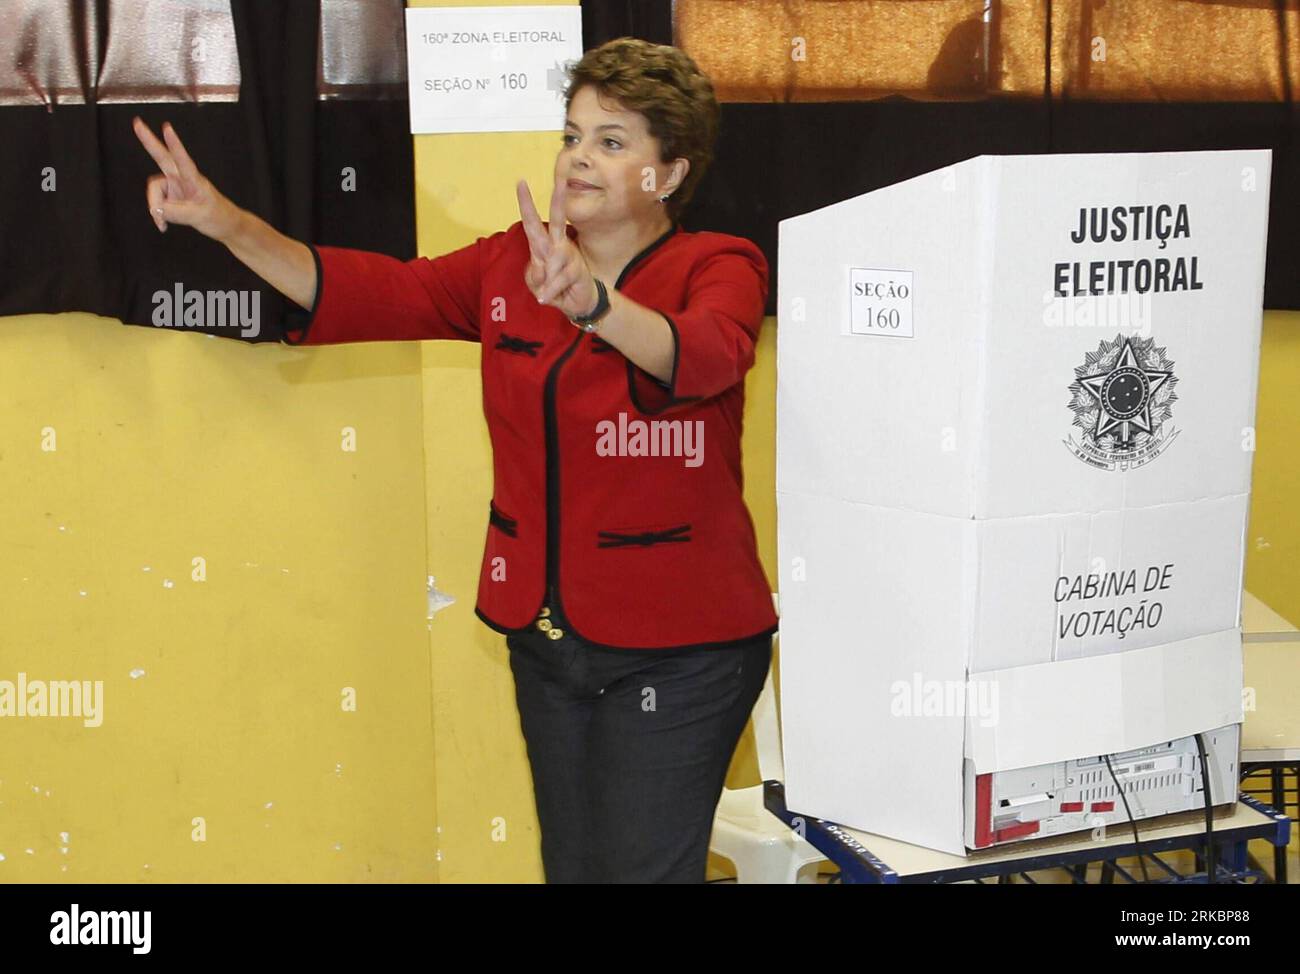 101031 -- PORTO ALEGRE, Oct. 31, 2010 Xinhua -- Brazilian presidential candidate for the ruling Workers Party Dilma Rousseff gestures as she votes at a polling station in the city of Porto Alegre, Rio Grande do Sul state, Brazil, Oct. 31, 2010. Brazilian polls opened at 8:00 a.m. local time 1000 GMT on Sunday for the runoff of the presidential election, in which 135.8 million voters would choose a new president and nine governors. Xinhua/Agencia EstadoBRASIL OUT zw BRAZIL-PRESIDENTIAL ELECTION-RUNOFF PUBLICATIONxNOTxINxCHN Stock Photo